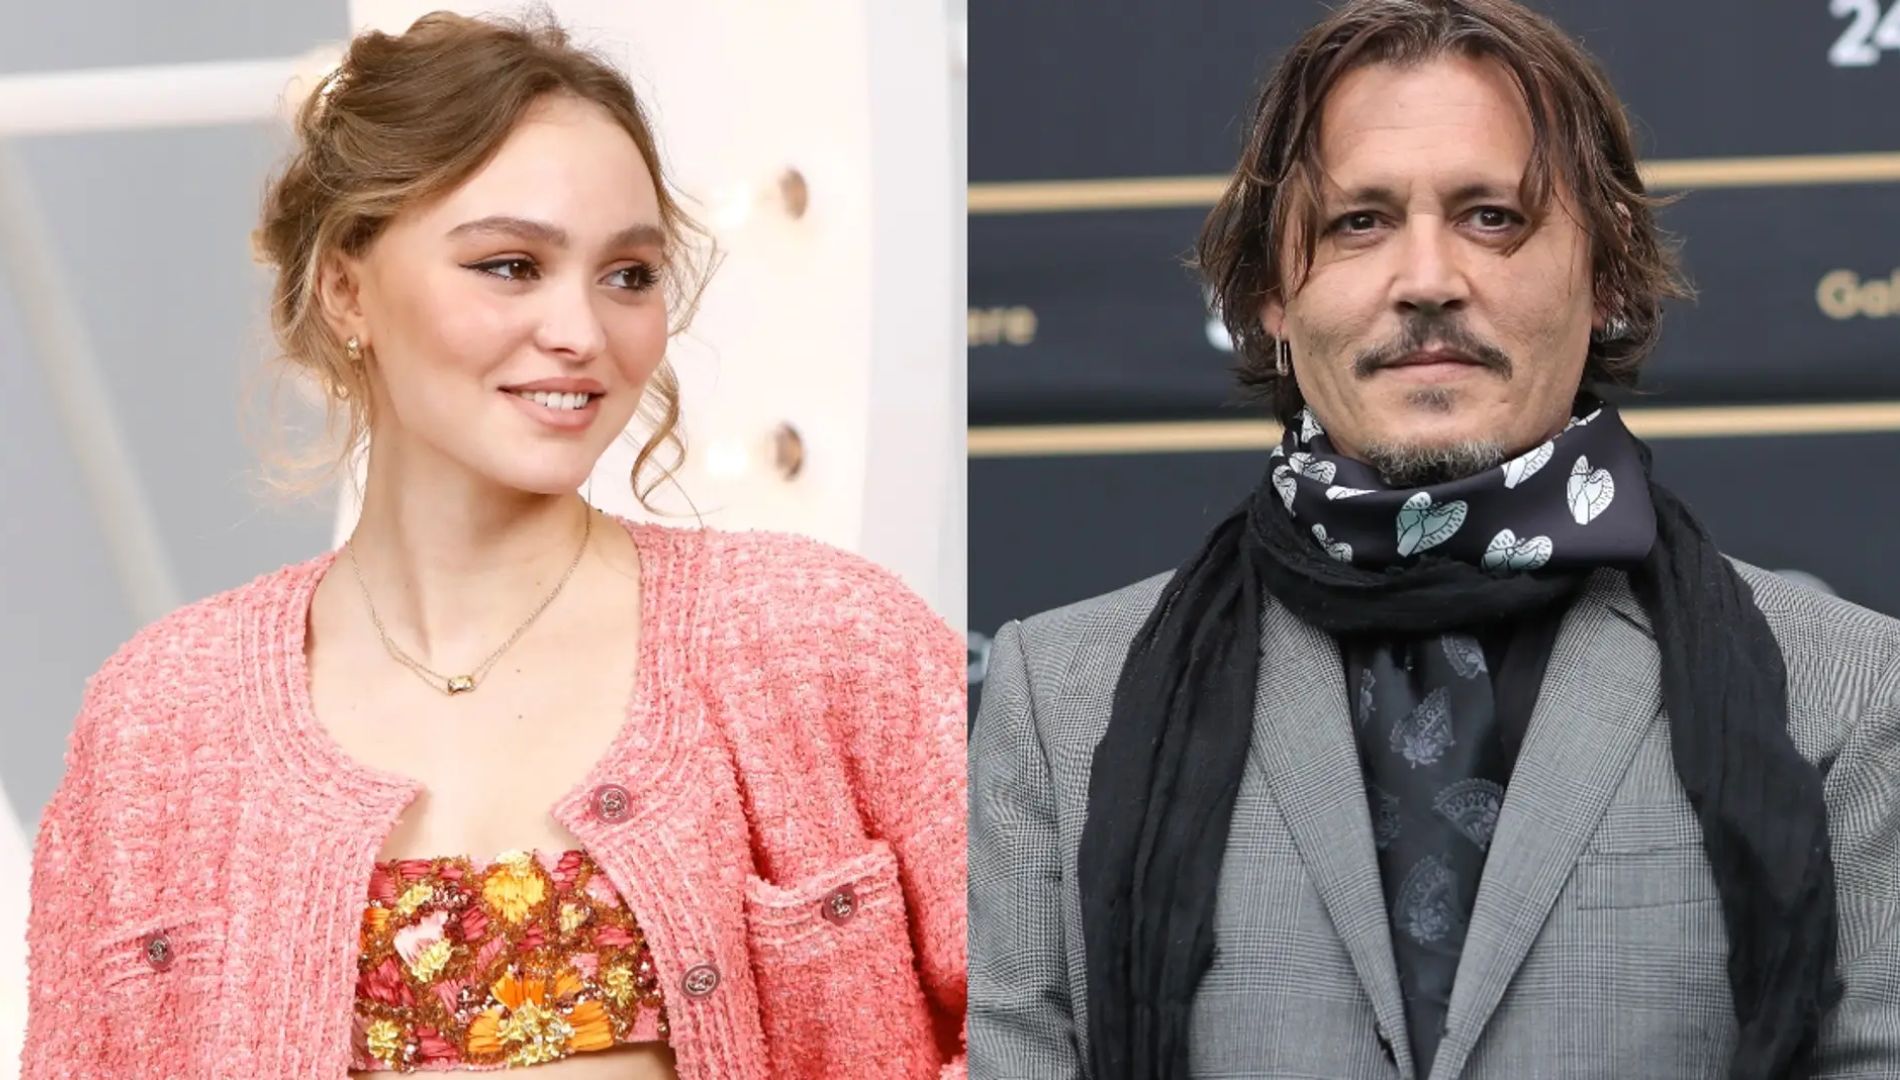 Johnny depp's daughter came to light and spoke about her father amid controversy